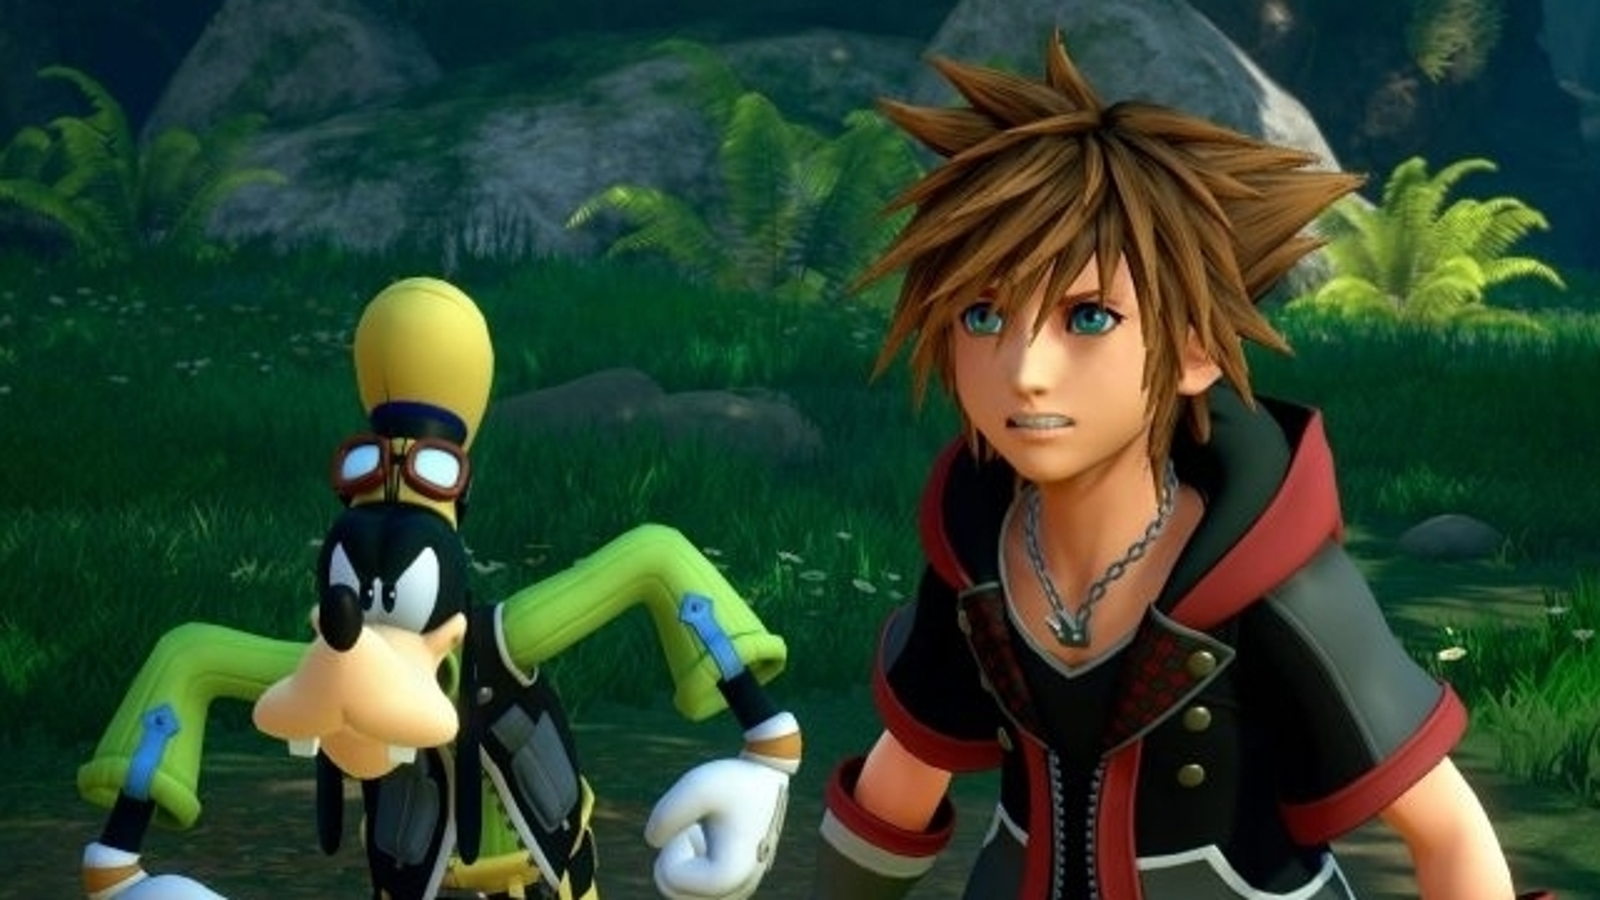 Why I chose to replay Kingdom Hearts 3 on the series' 20th